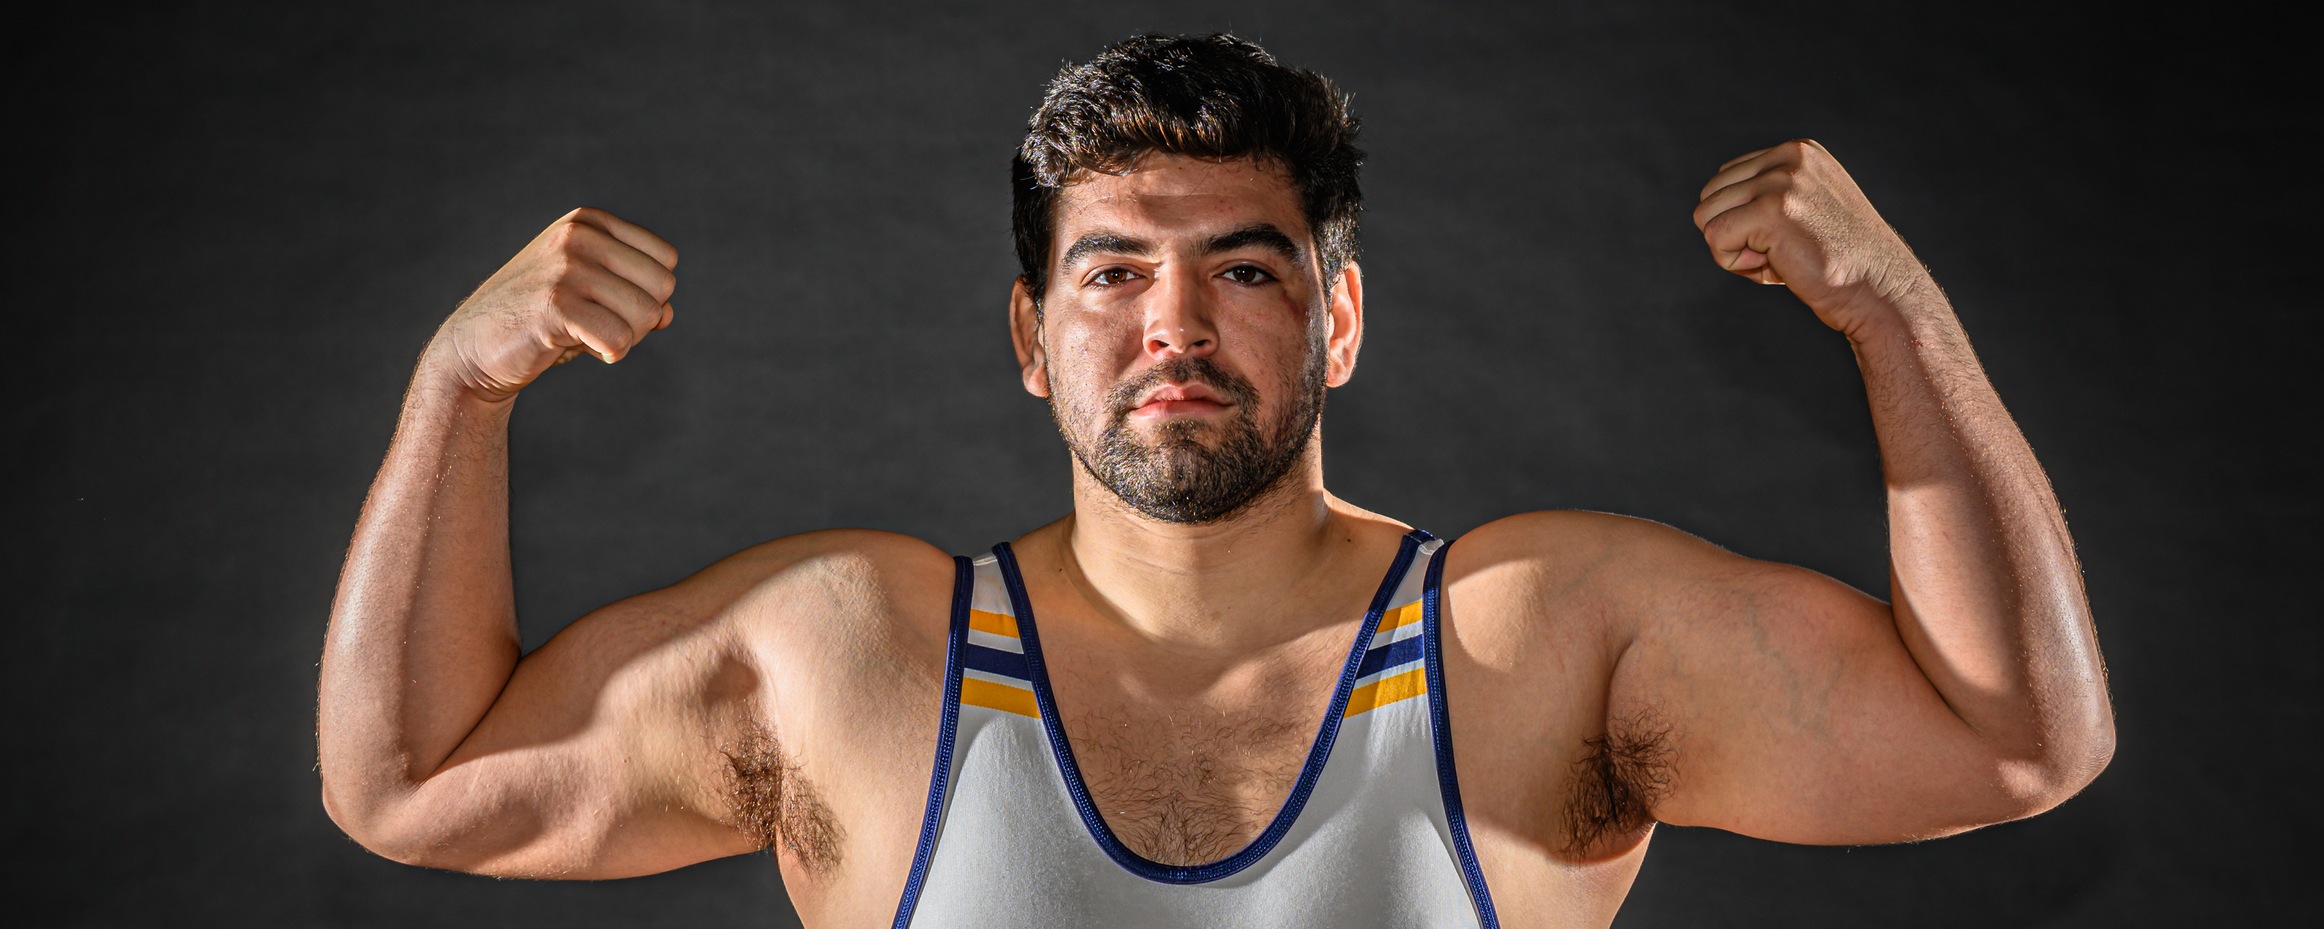 Correa Ranked 11th in Latest NWCA National Rankings, Coker Still Receiving Votes Nationally